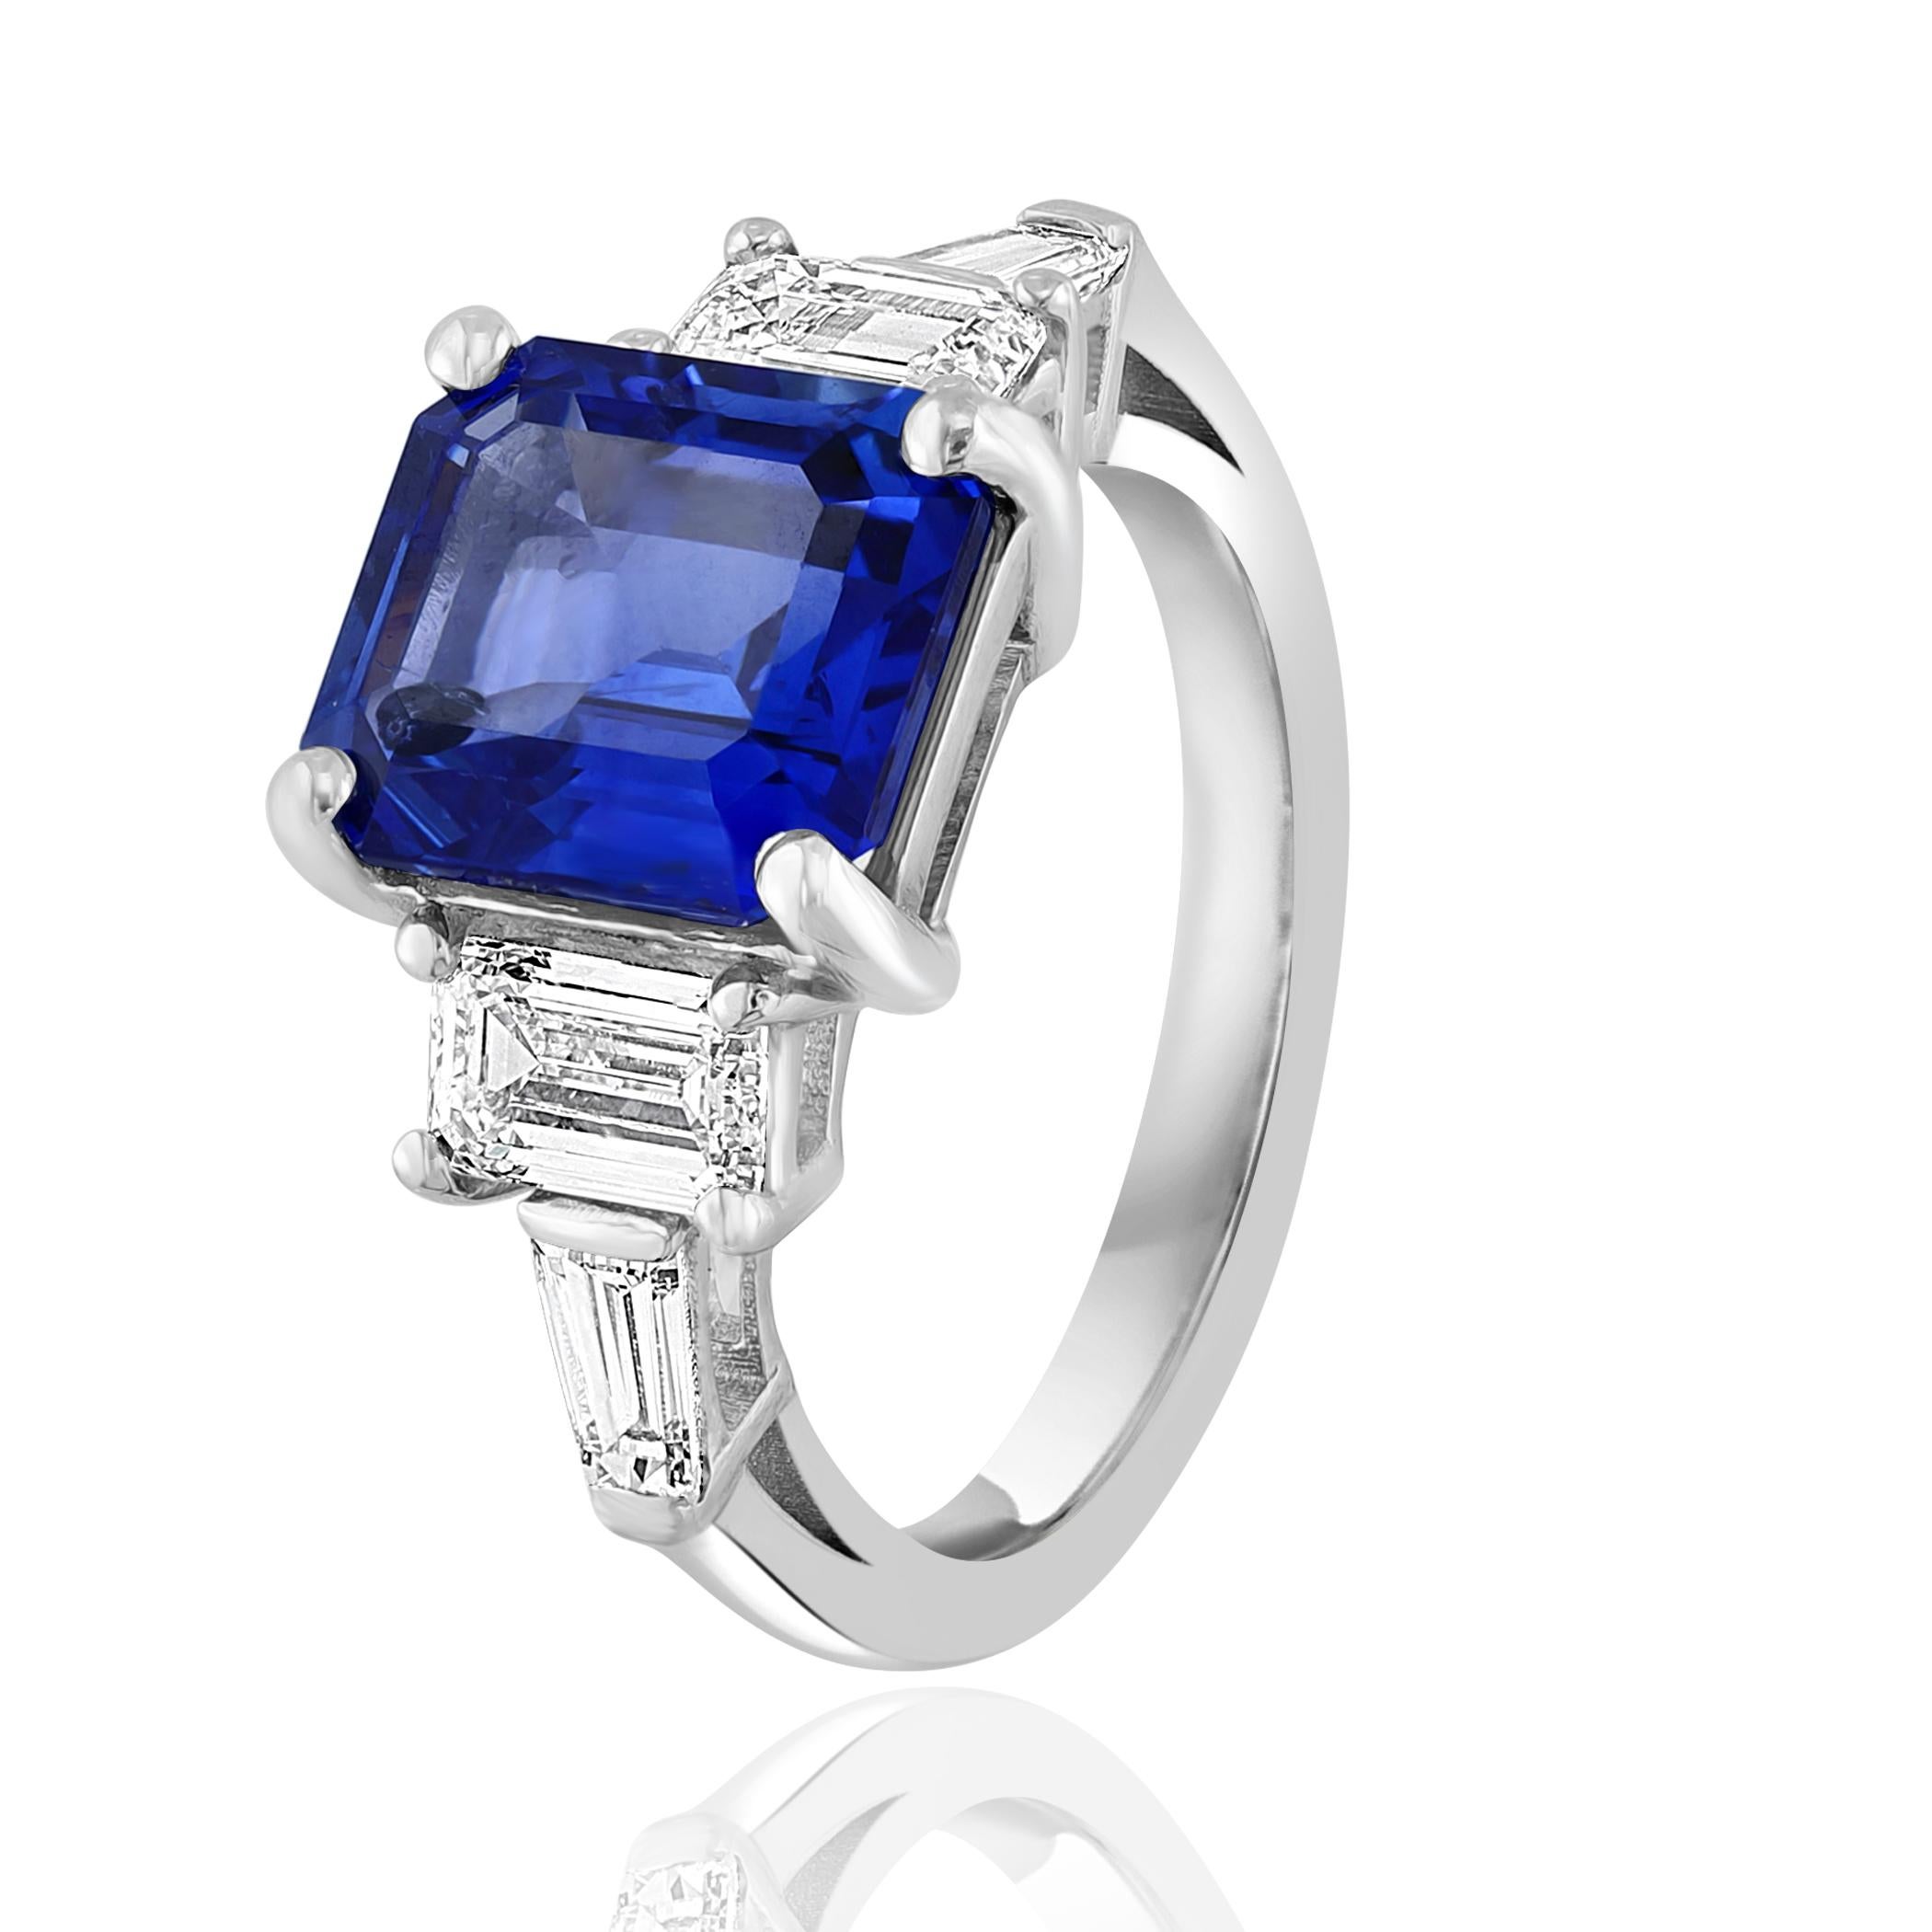 Showcasing color-rich 4.74 carat Certified Blue Sapphire. Two perfectly matched GIA Certified emerald cut diamonds weighing 1.05 carat elegantly flank the center emerald cut blue sapphire for a very classy and sophisticated piece. Additional 2